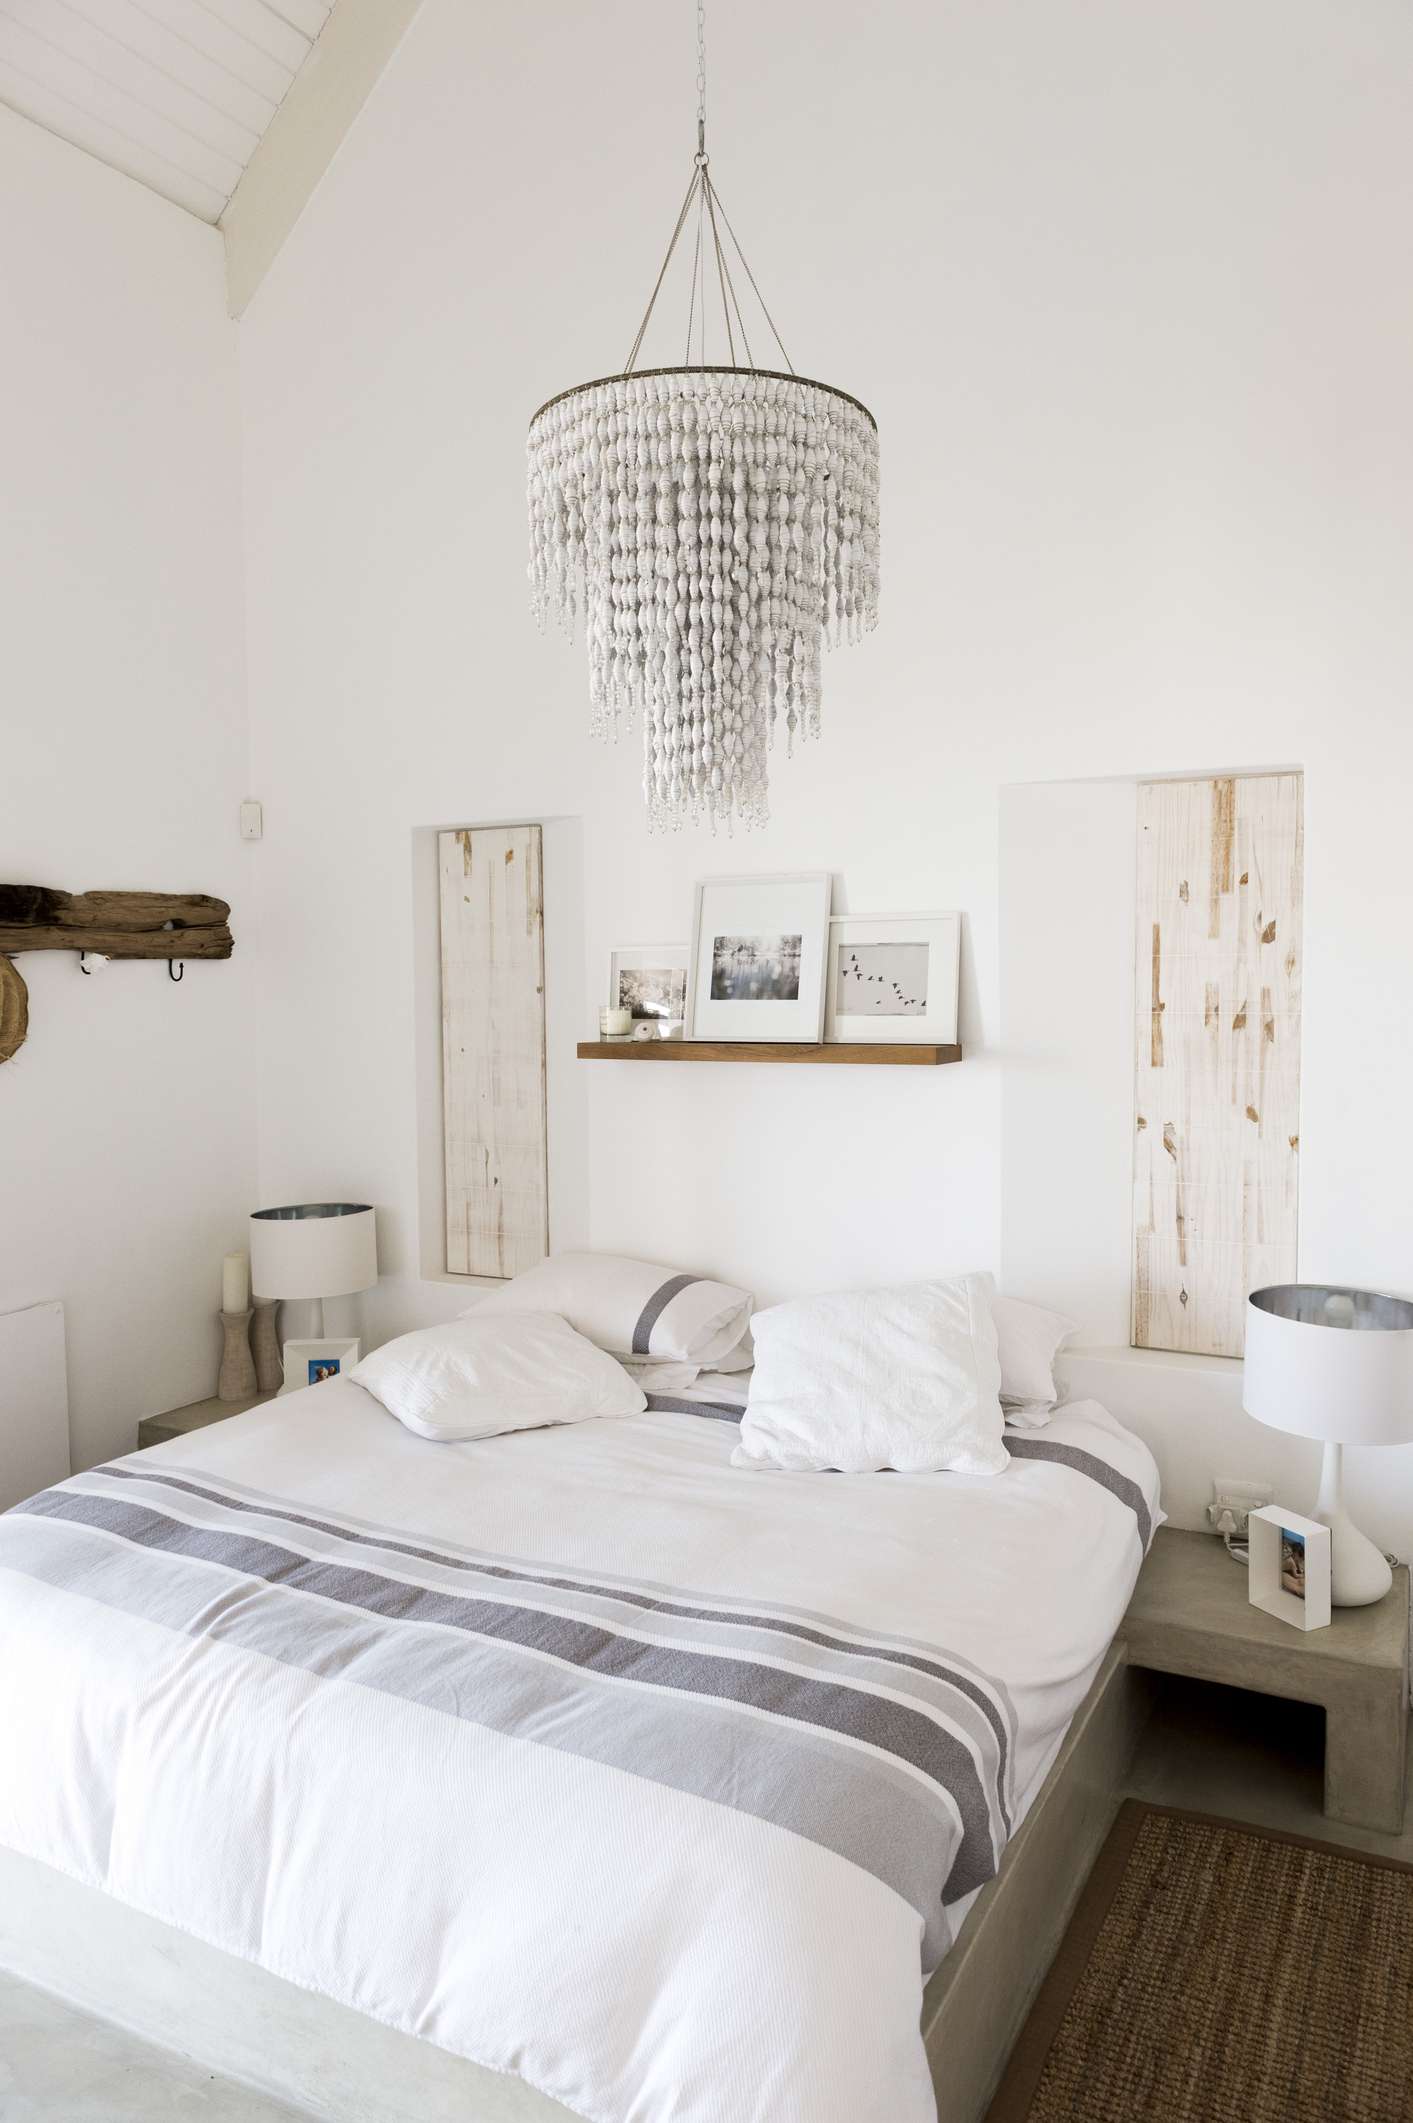 Bedroom light fixture brings height and drama